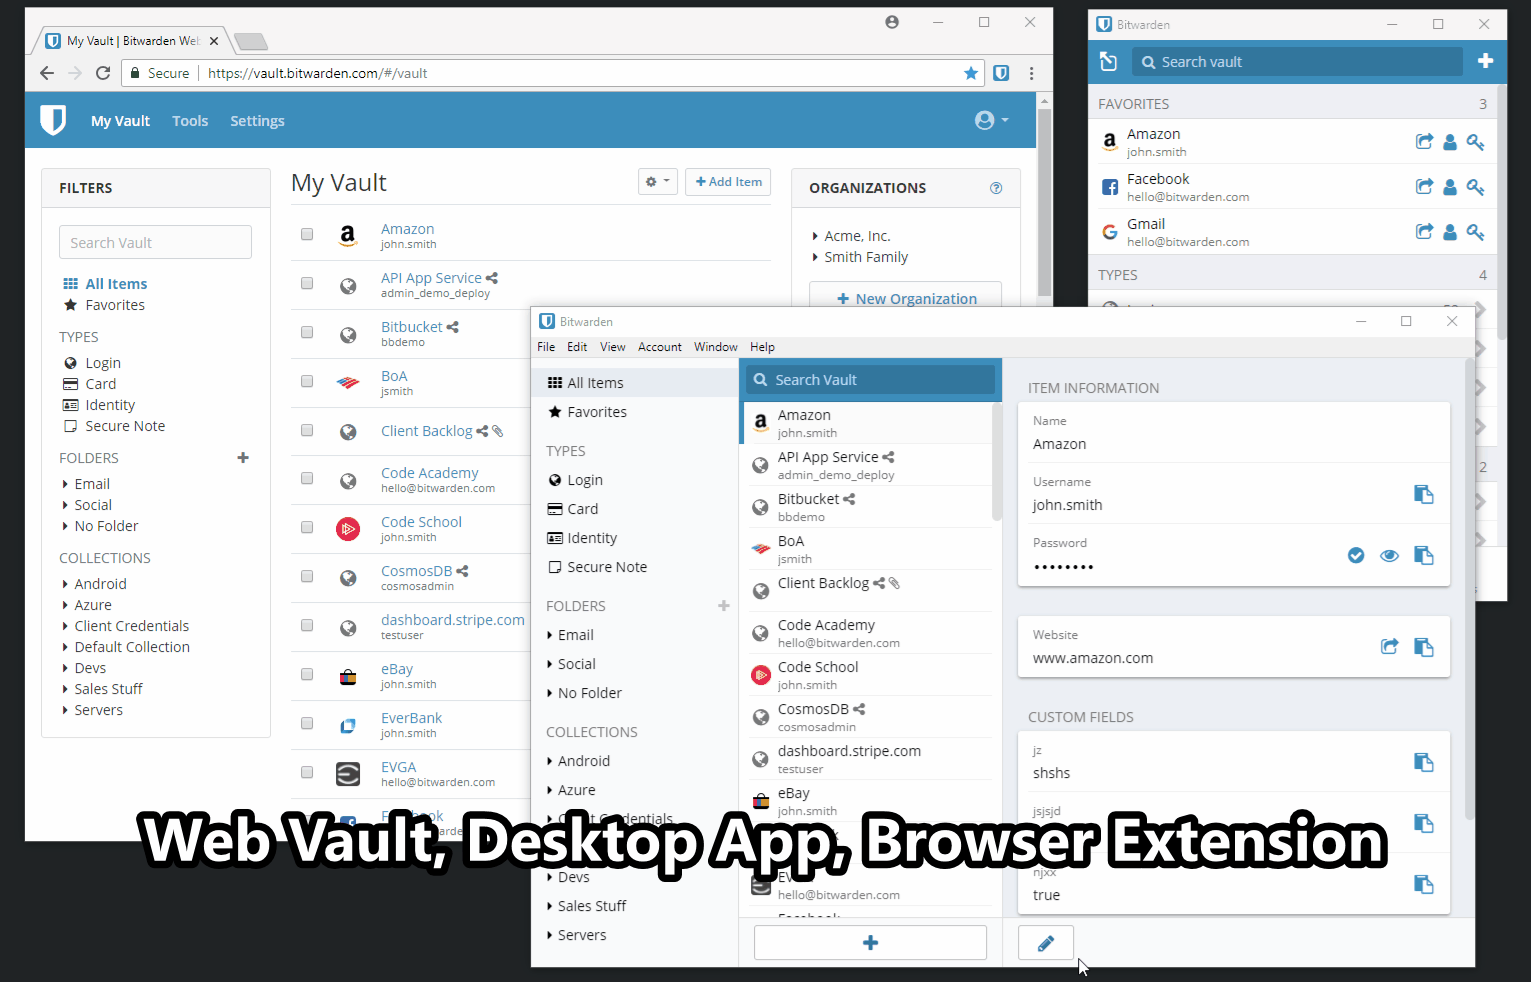 Live syncing a change from the desktop app to the web vault and browser extension | 